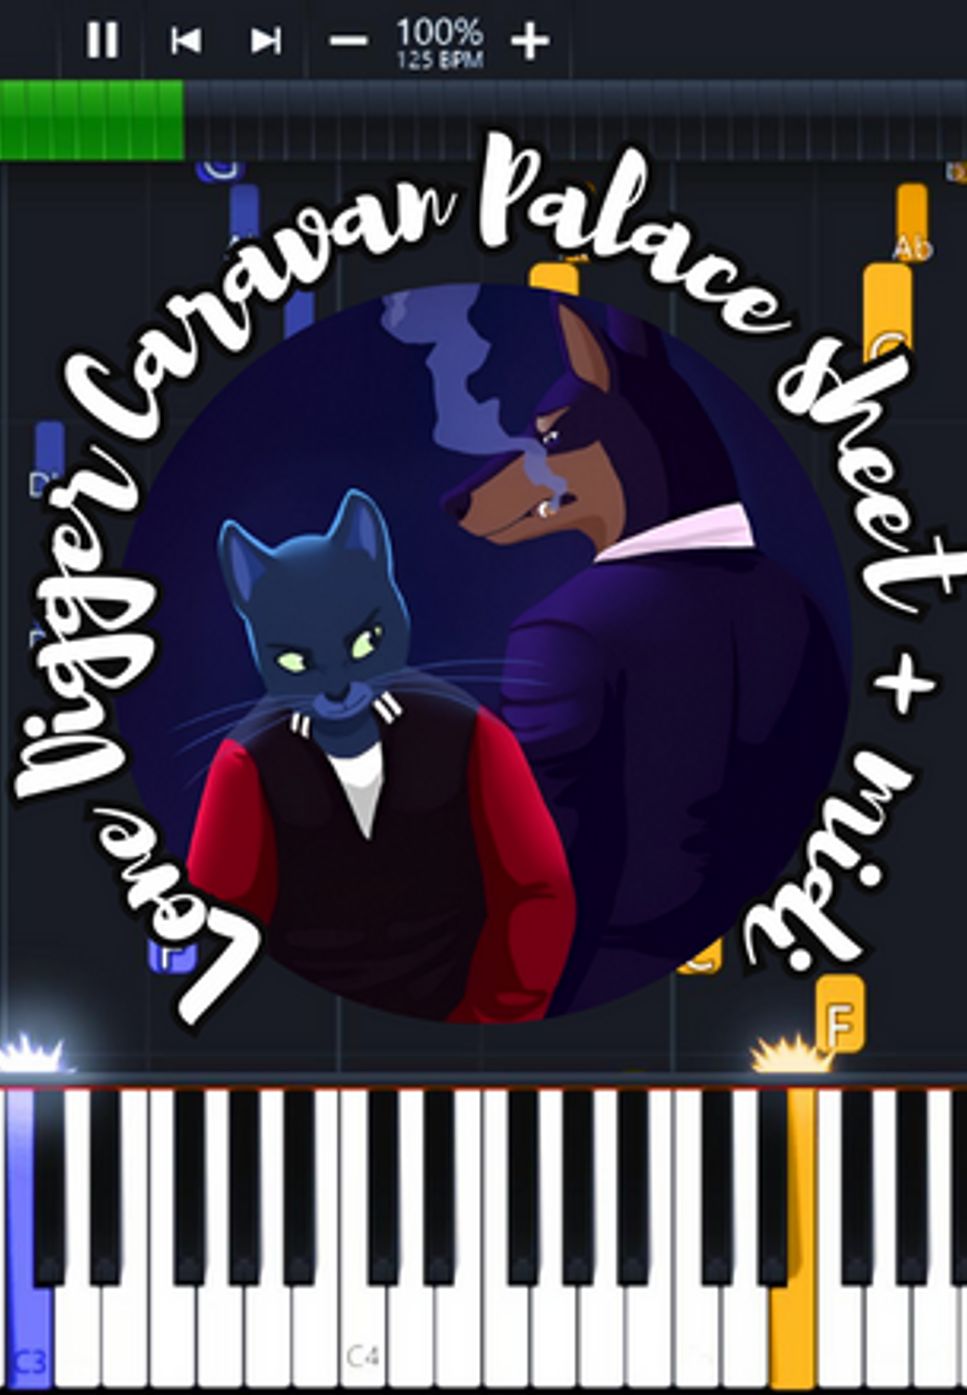 Caravan Palace - Lone Digger by Marco D.